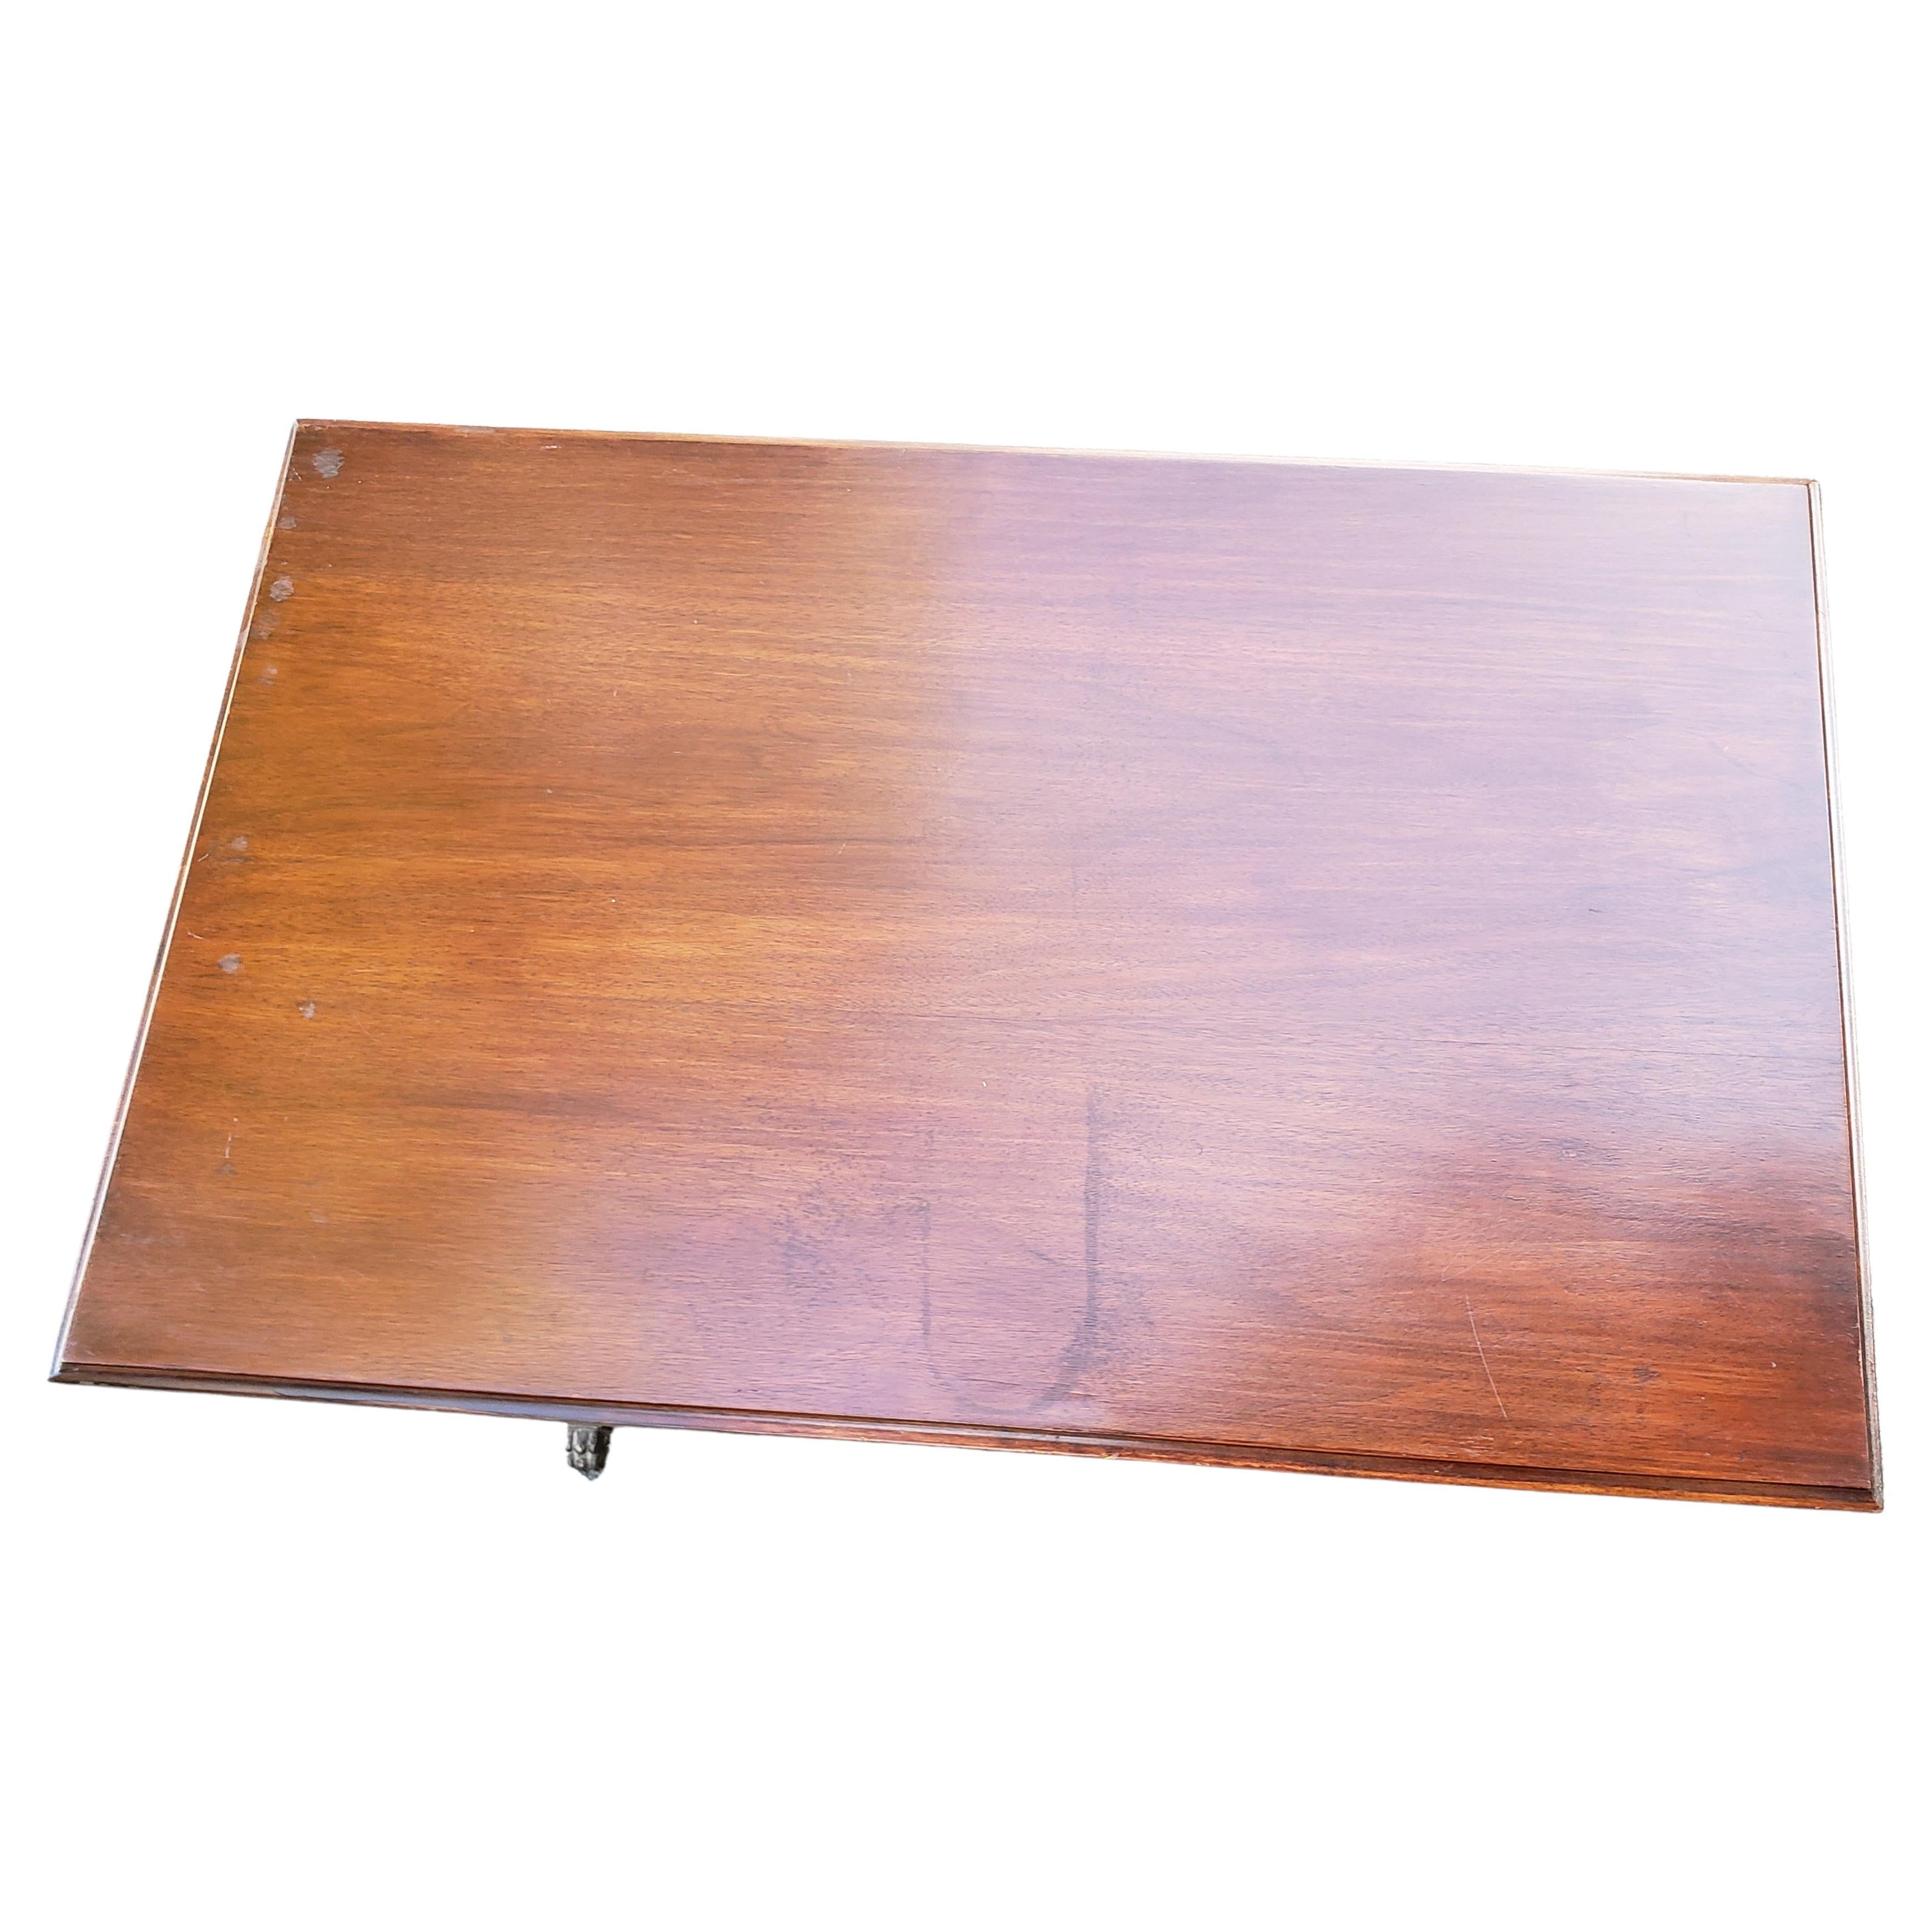 Vintage Small Space American Mahogany Tea / Coffee Table, circa 1930s For Sale 2